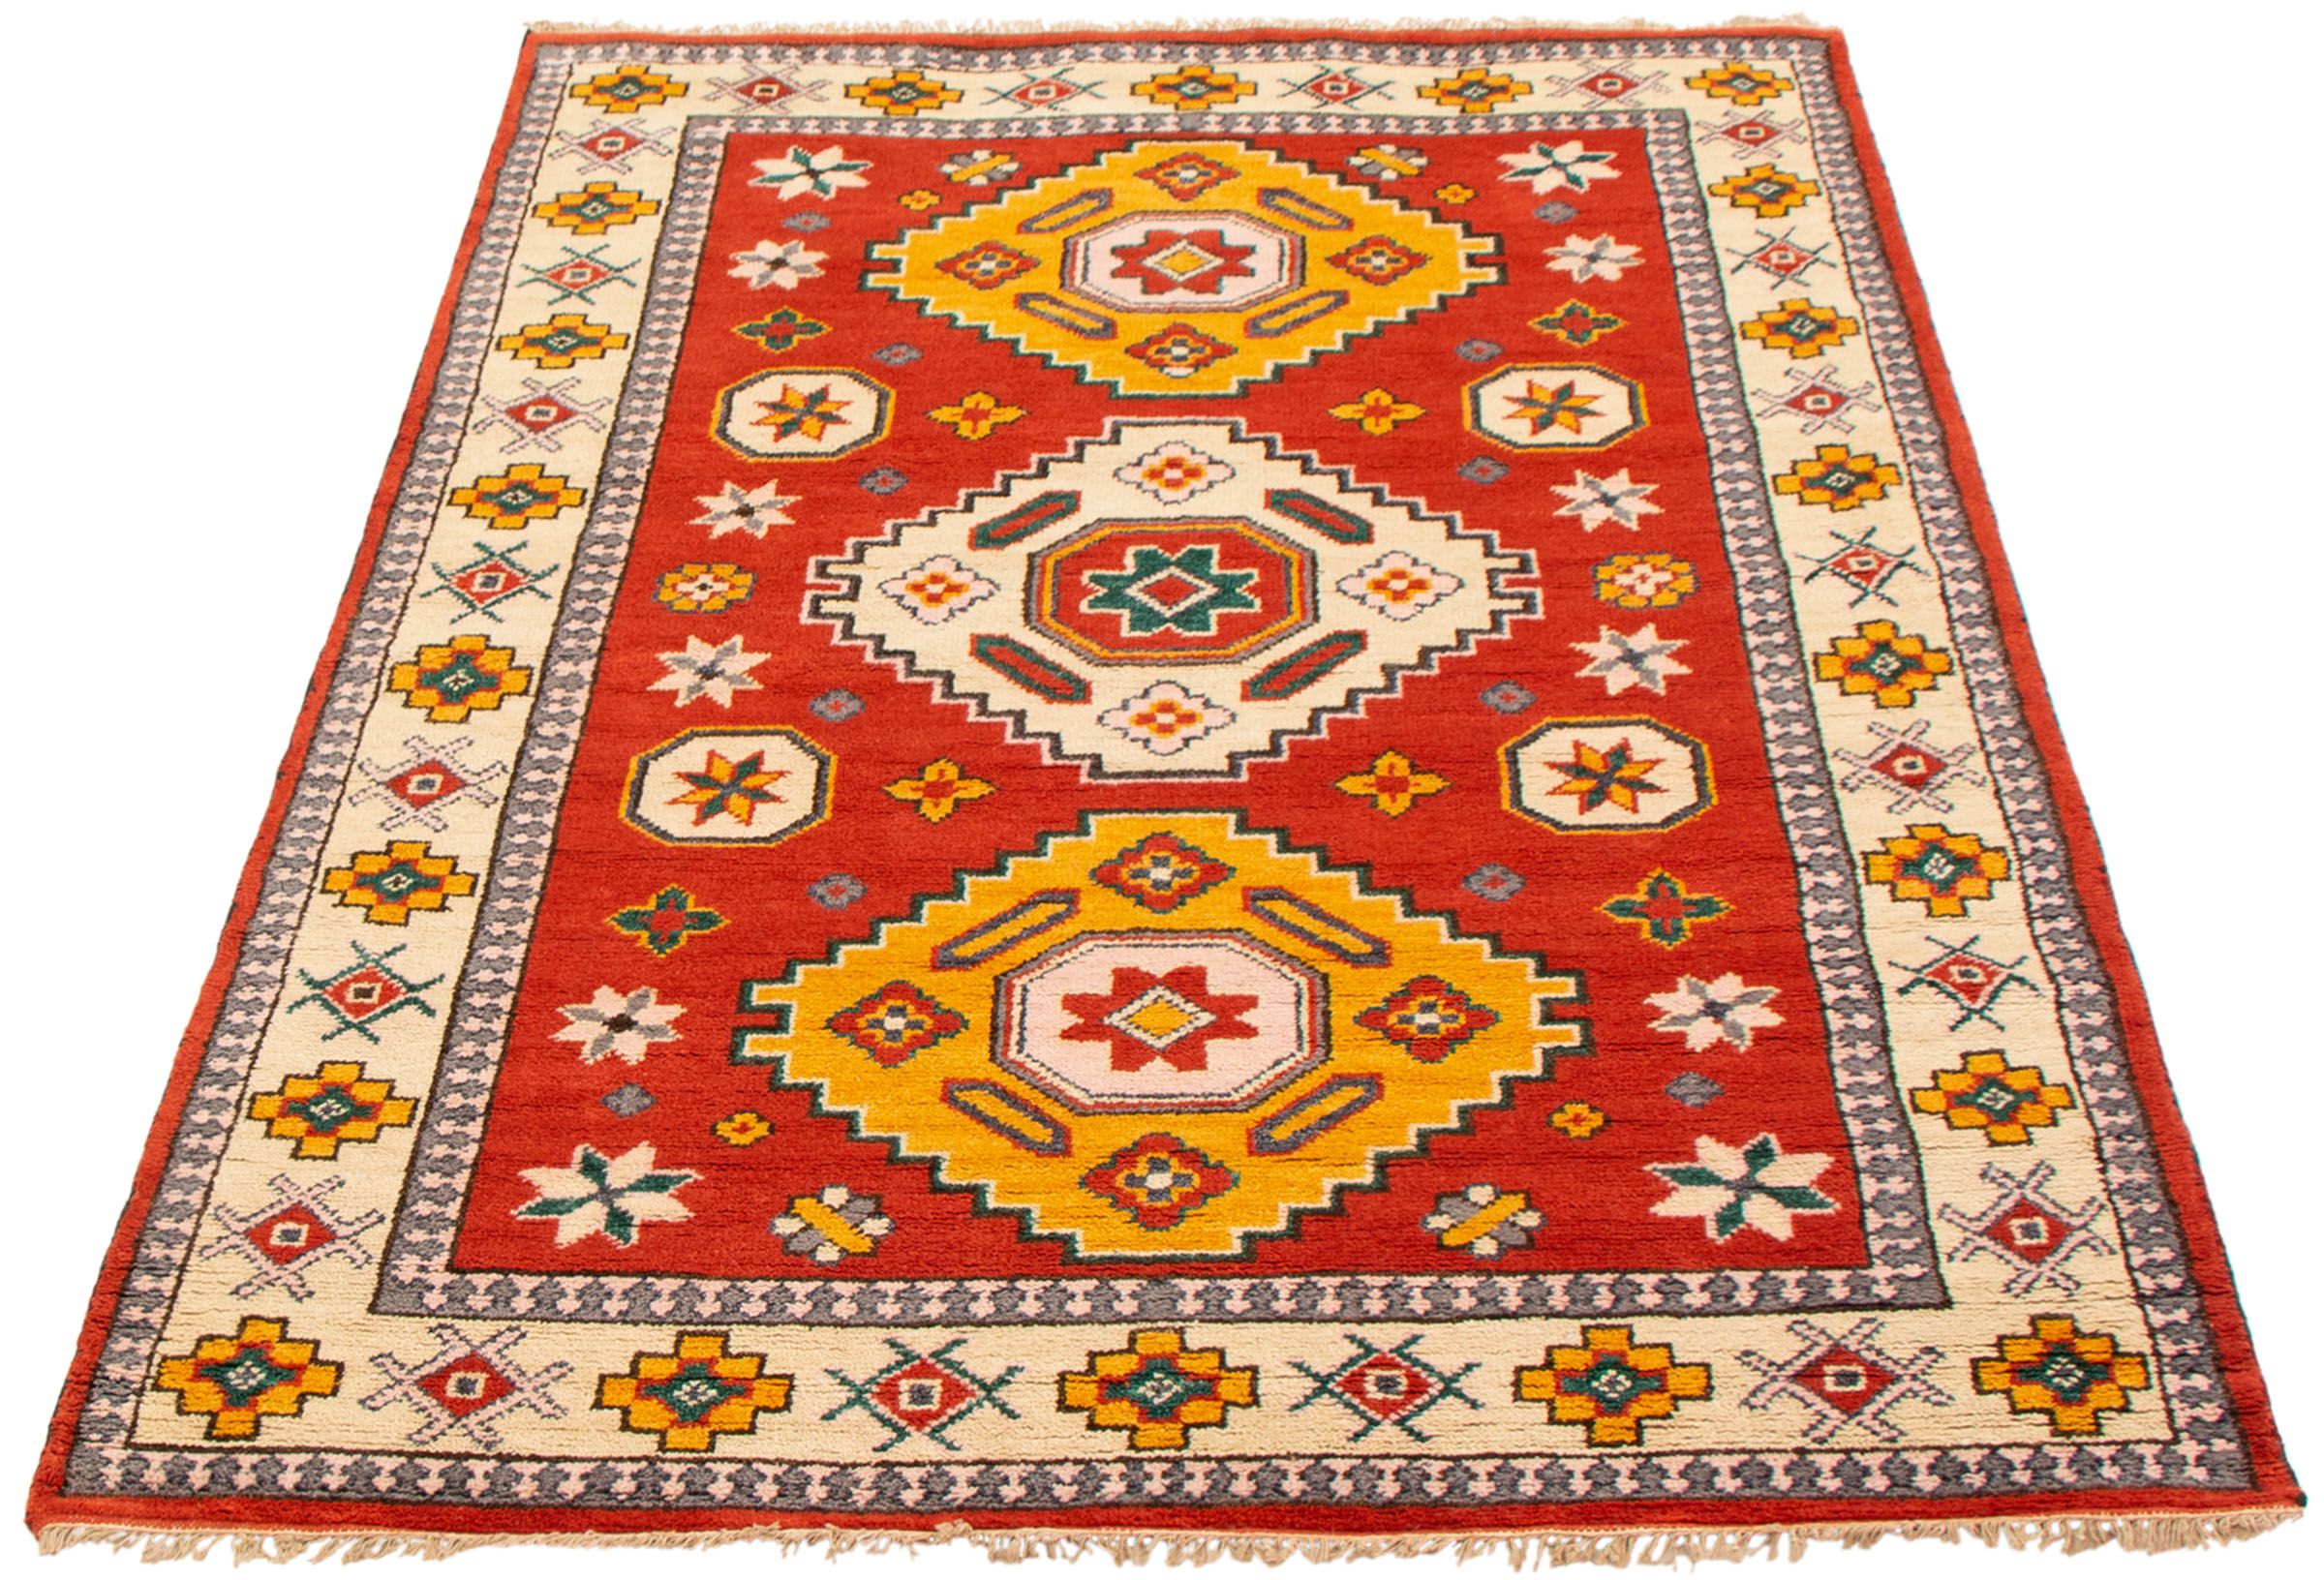 360410 Finest Khal Mohammadi Bordered Red Rug 5'9 x 8'0 Hand-Knotted Wool Rug Bedroom eCarpet Gallery Area Rug for Living Room 